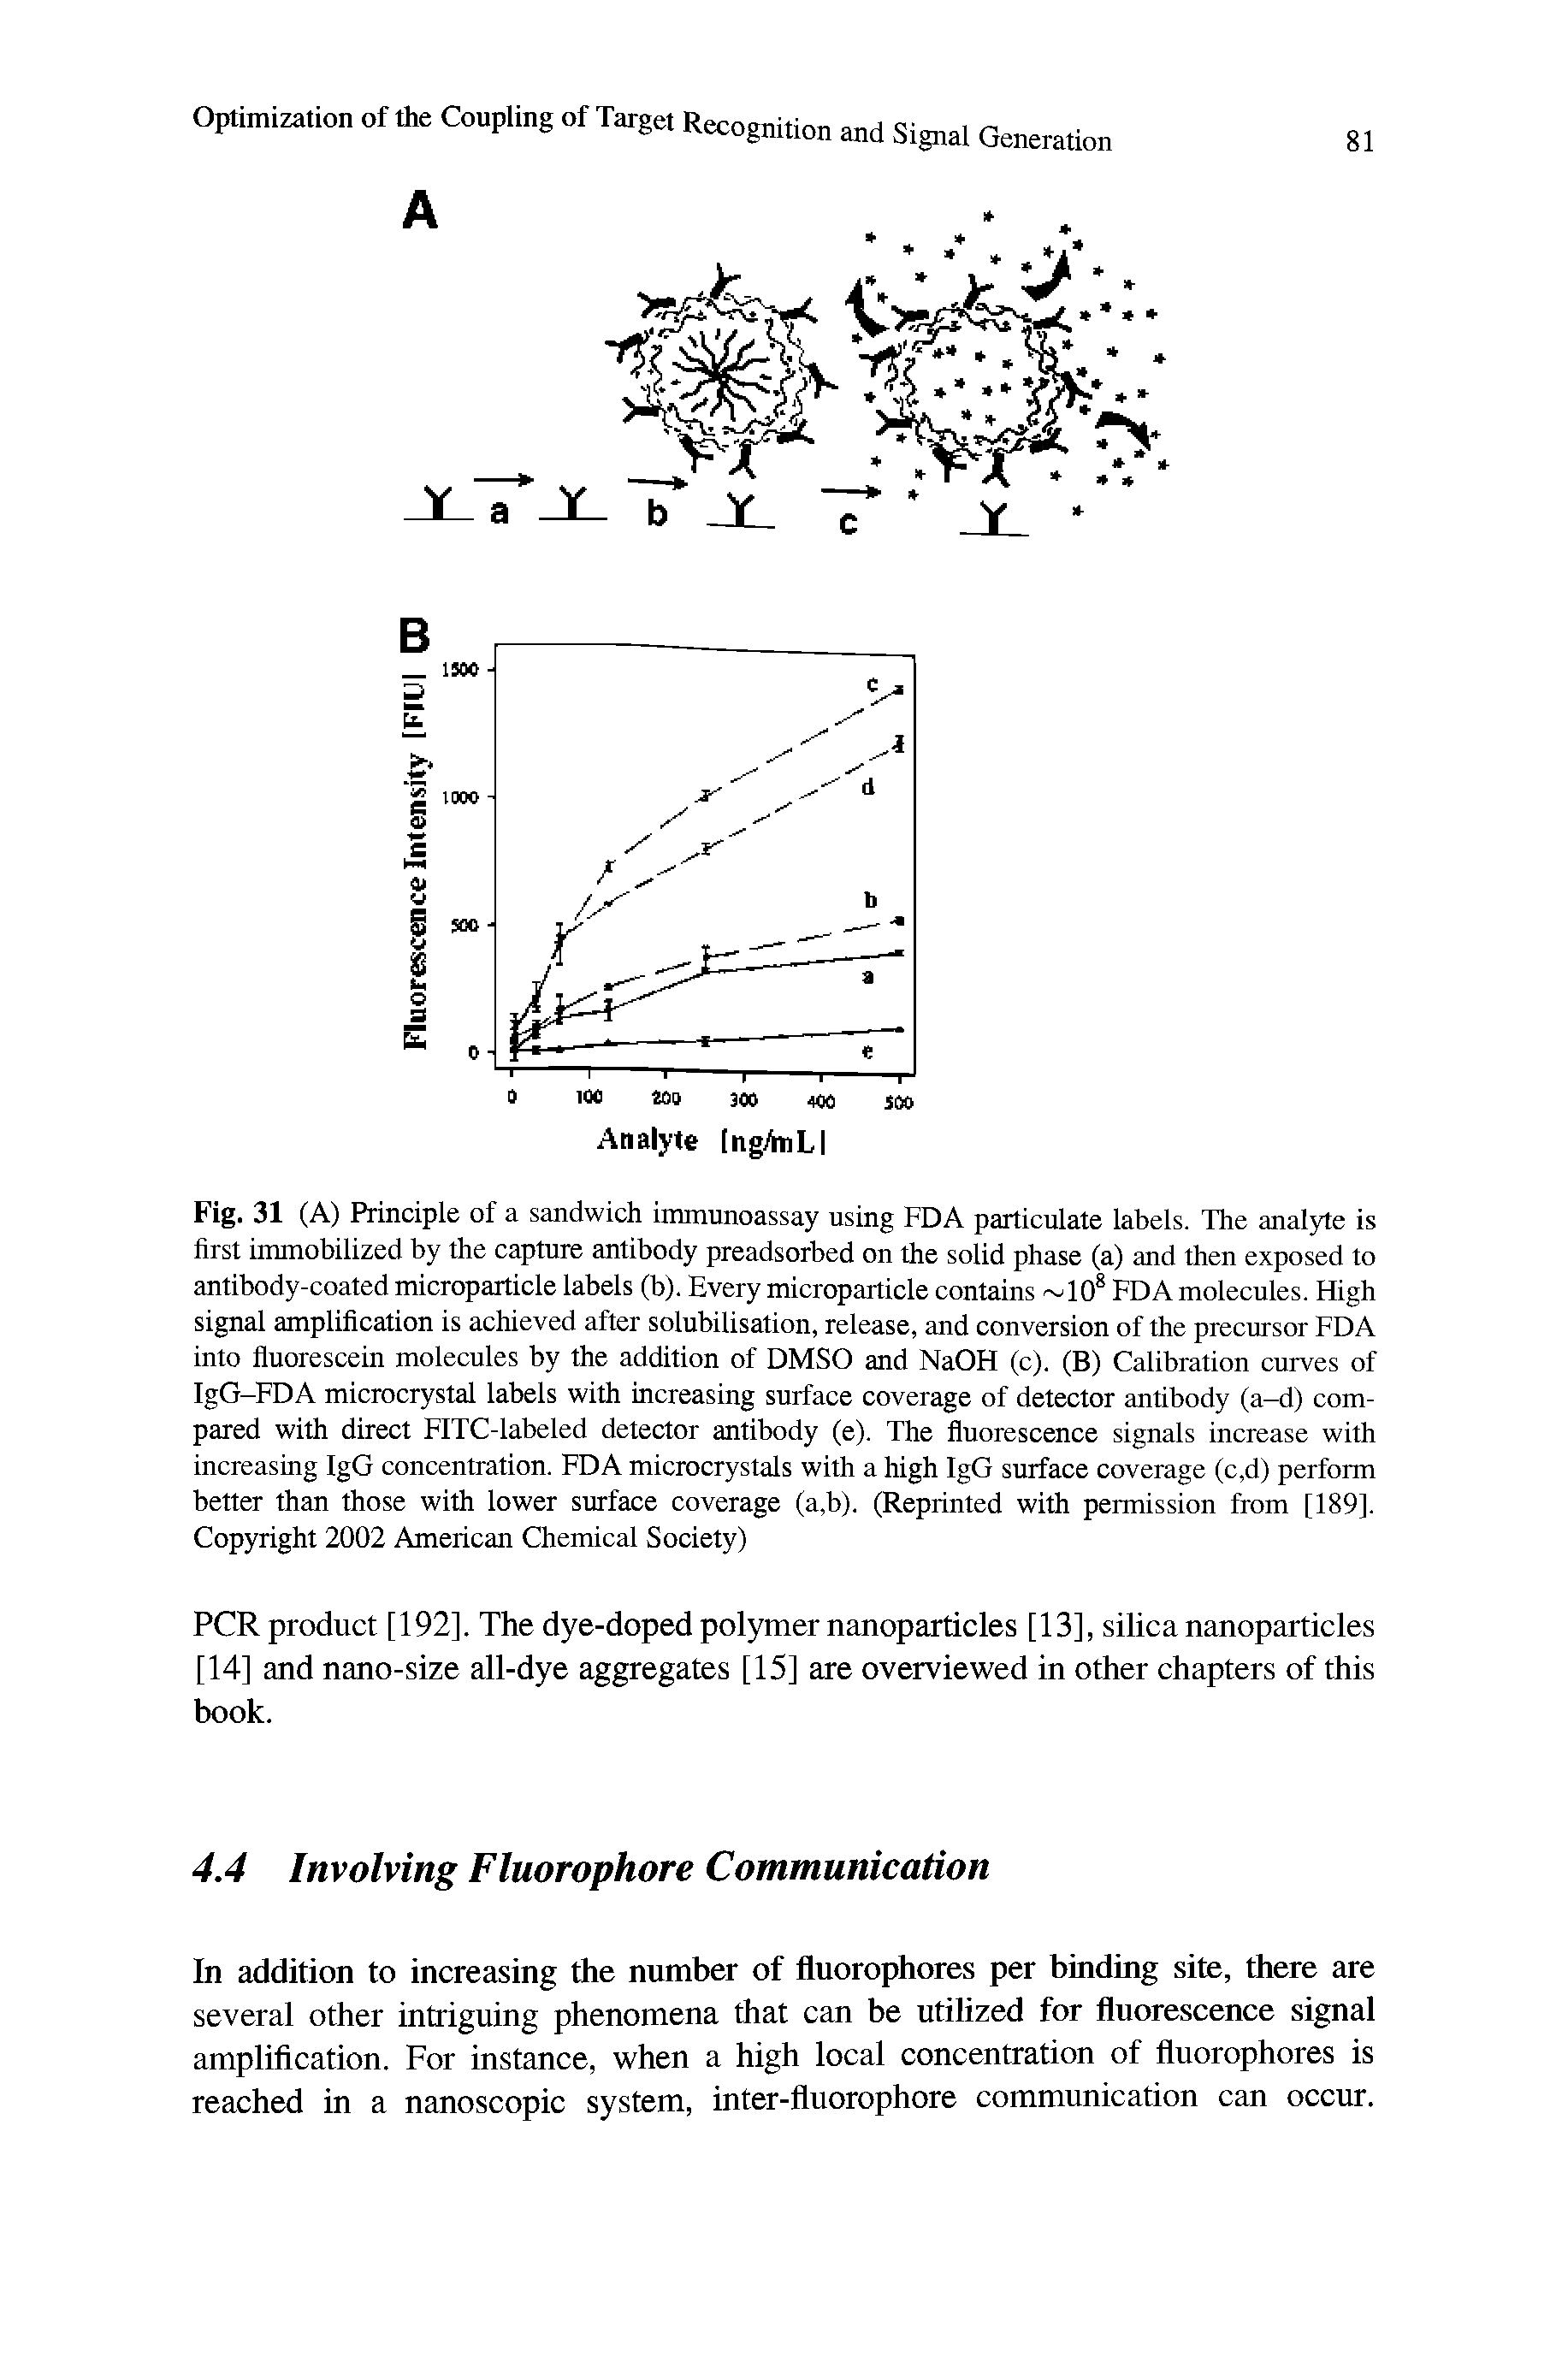 Fig. 31 (A) Principle of a sandwich immunoassay using FDA particulate labels. The analyte is first immobilized by the capture antibody preadsorbed on the solid phase (a) and then exposed to antibody-coated microparticle labels (b). Every microparticle contains 108 FDA molecules. High signal amplification is achieved after solubilisation, release, and conversion of the precursor FDA into fluorescein molecules by the addition of DMSO and NaOH (c). (B) Calibration curves of IgG-FDA microcrystal labels with increasing surface coverage of detector antibody (a-d) compared with direct FITC-labeled detector antibody (e). The fluorescence signals increase with increasing IgG concentration. FDA microcrystals with a high IgG surface coverage (c,d) perform better than those with lower surface coverage (a,b). (Reprinted with permission from [189]. Copyright 2002 American Chemical Society)...